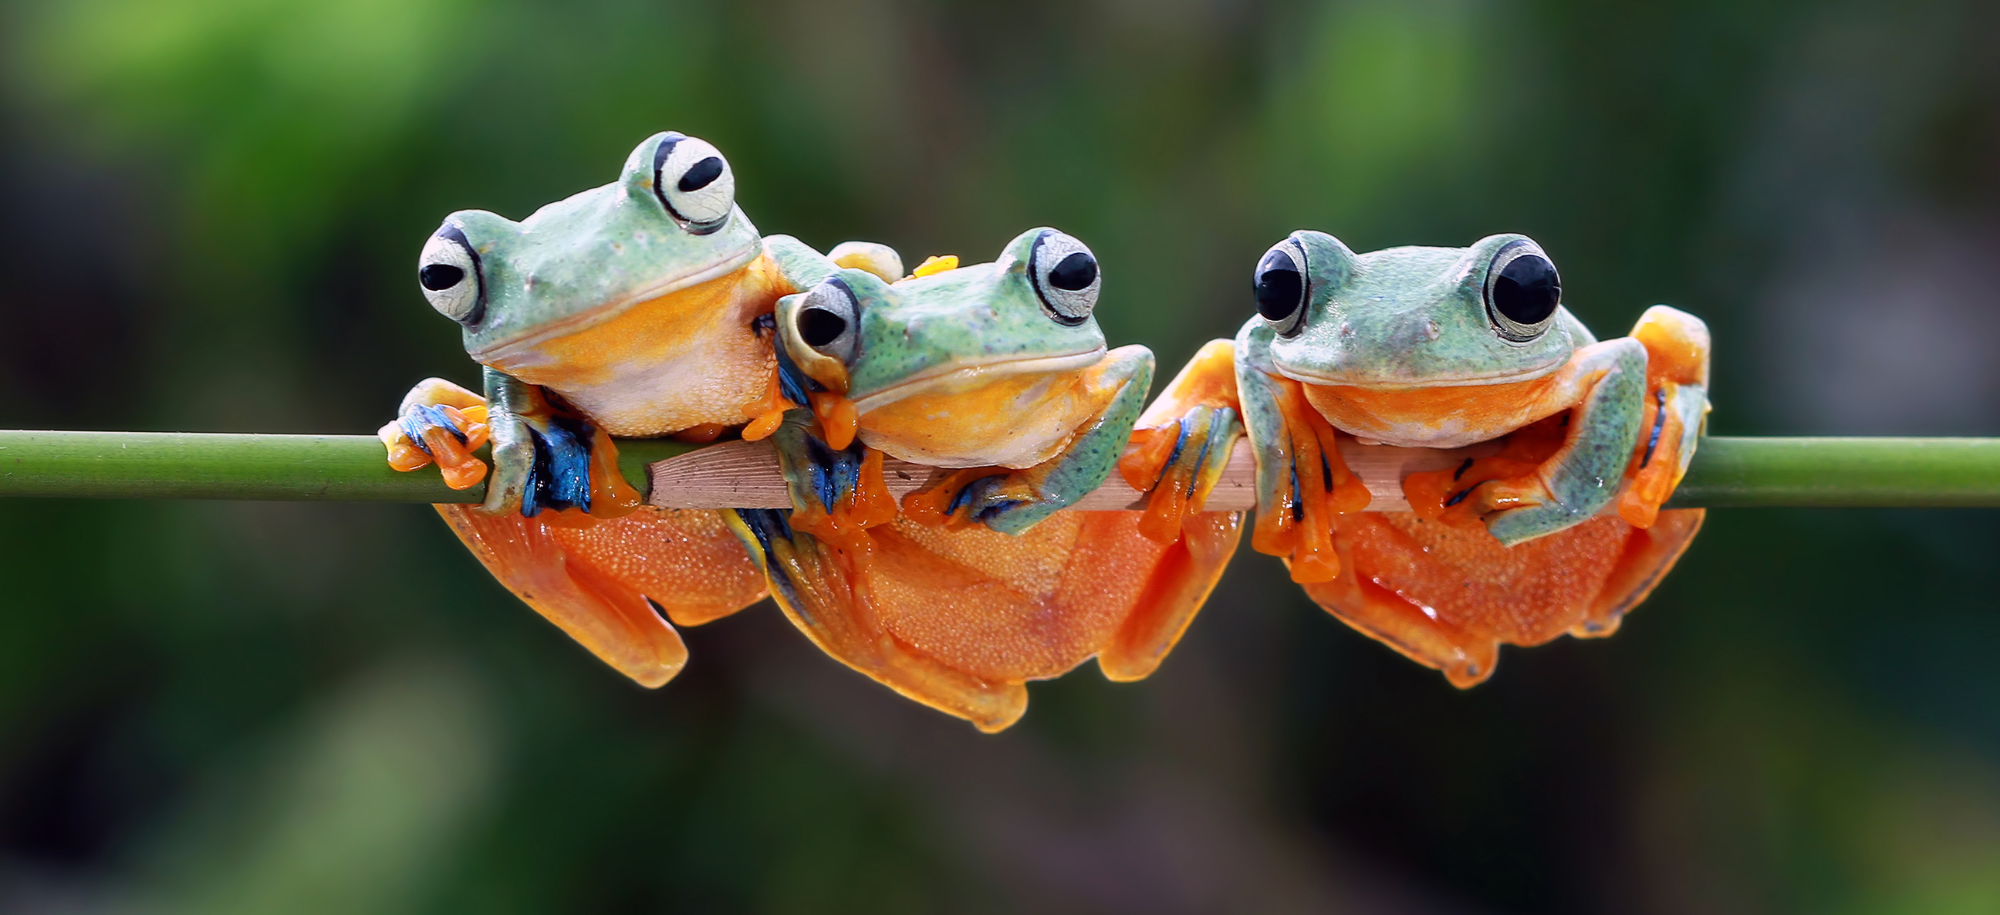 Frogs on a stem.